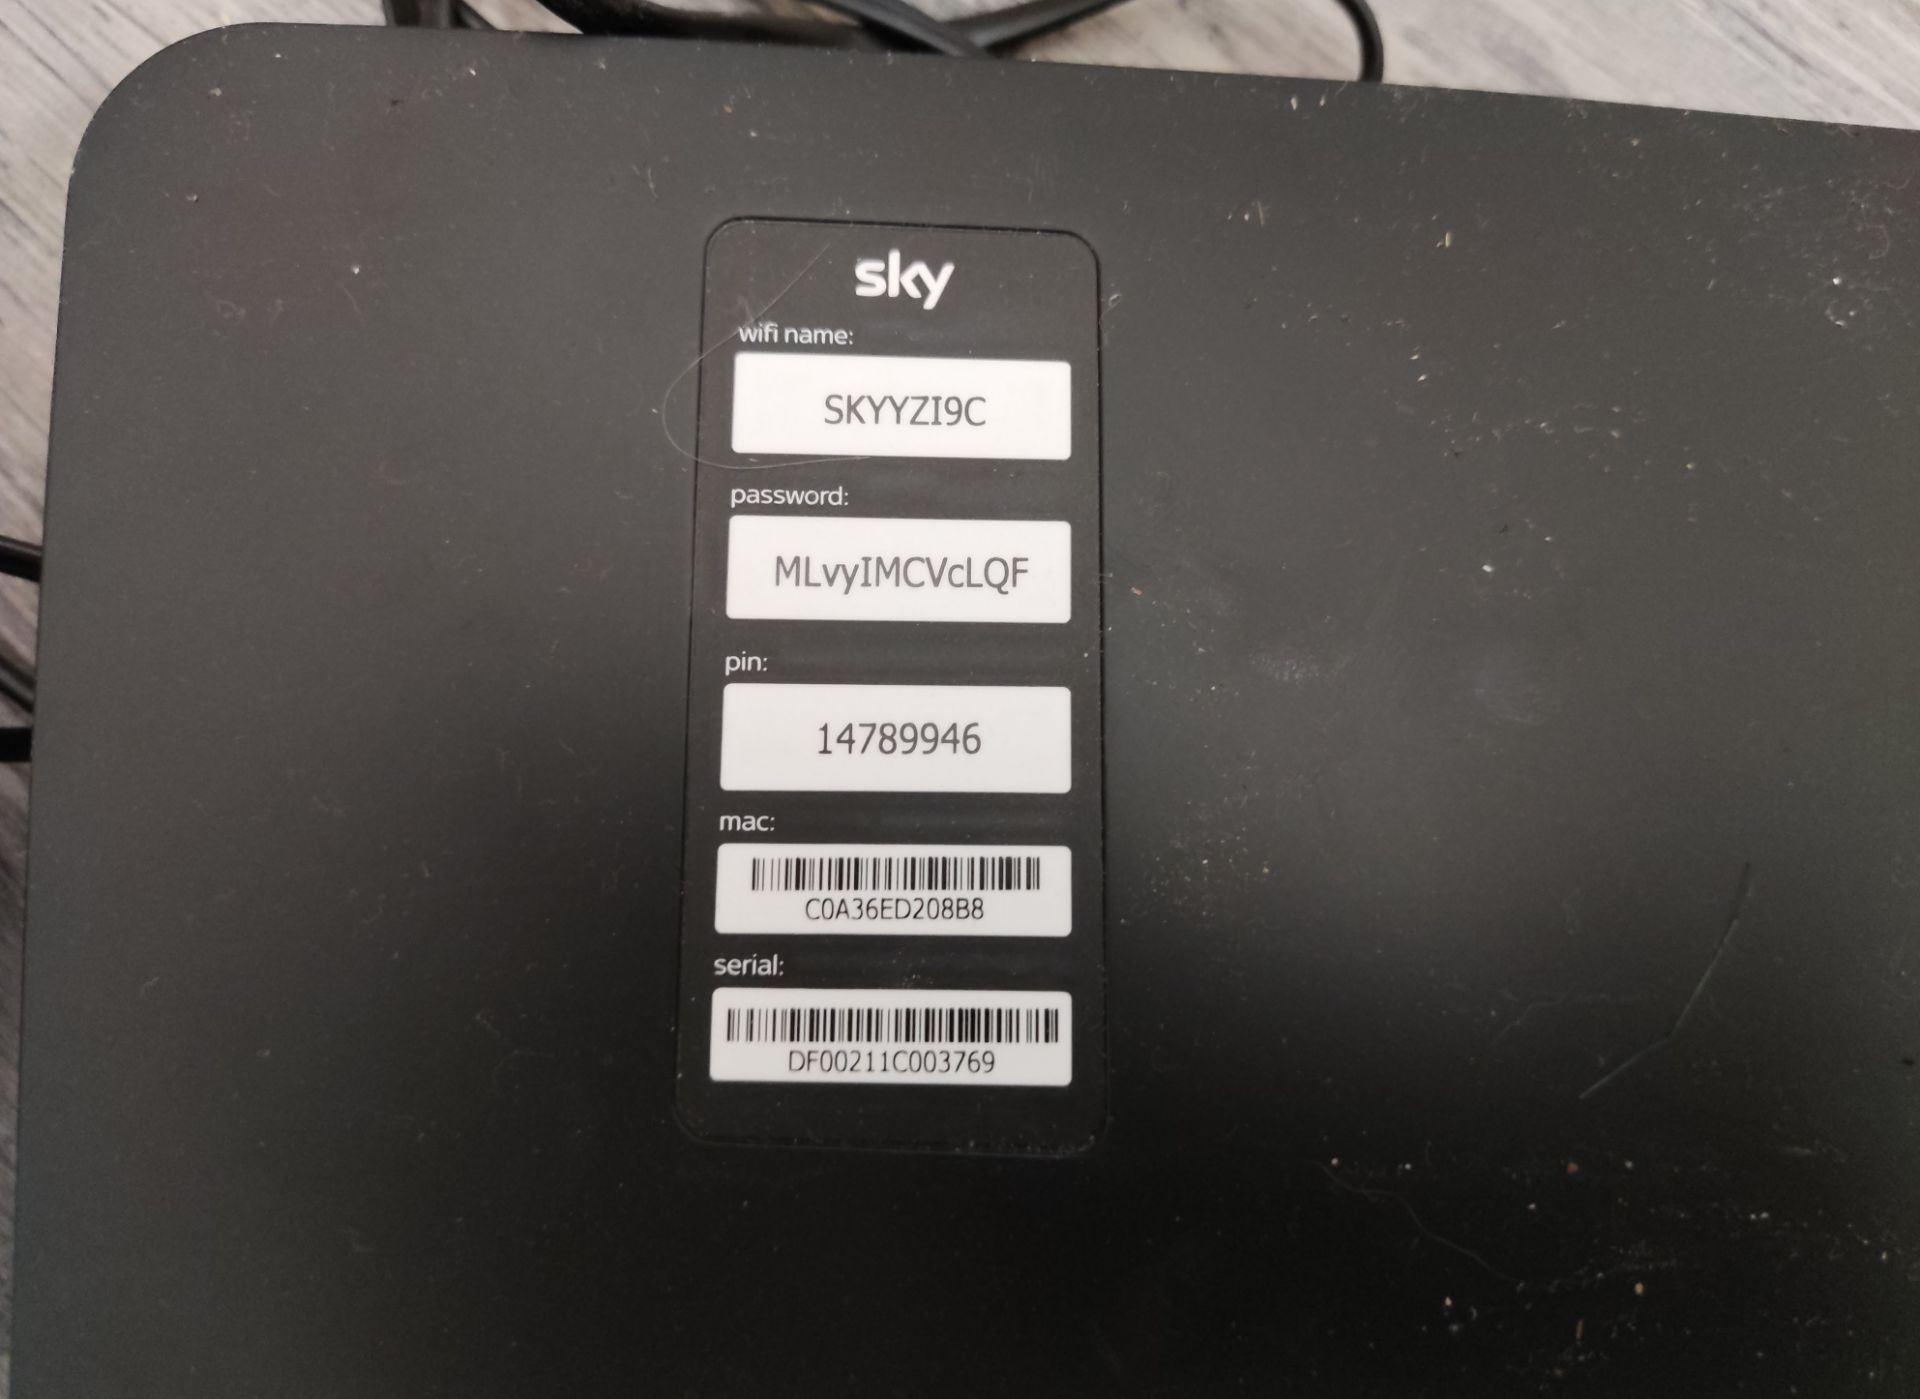 1 x Sky BR203 Network Hub - LBC109 - CL763- Location: Sale M33This item is from a recently c - Image 3 of 4